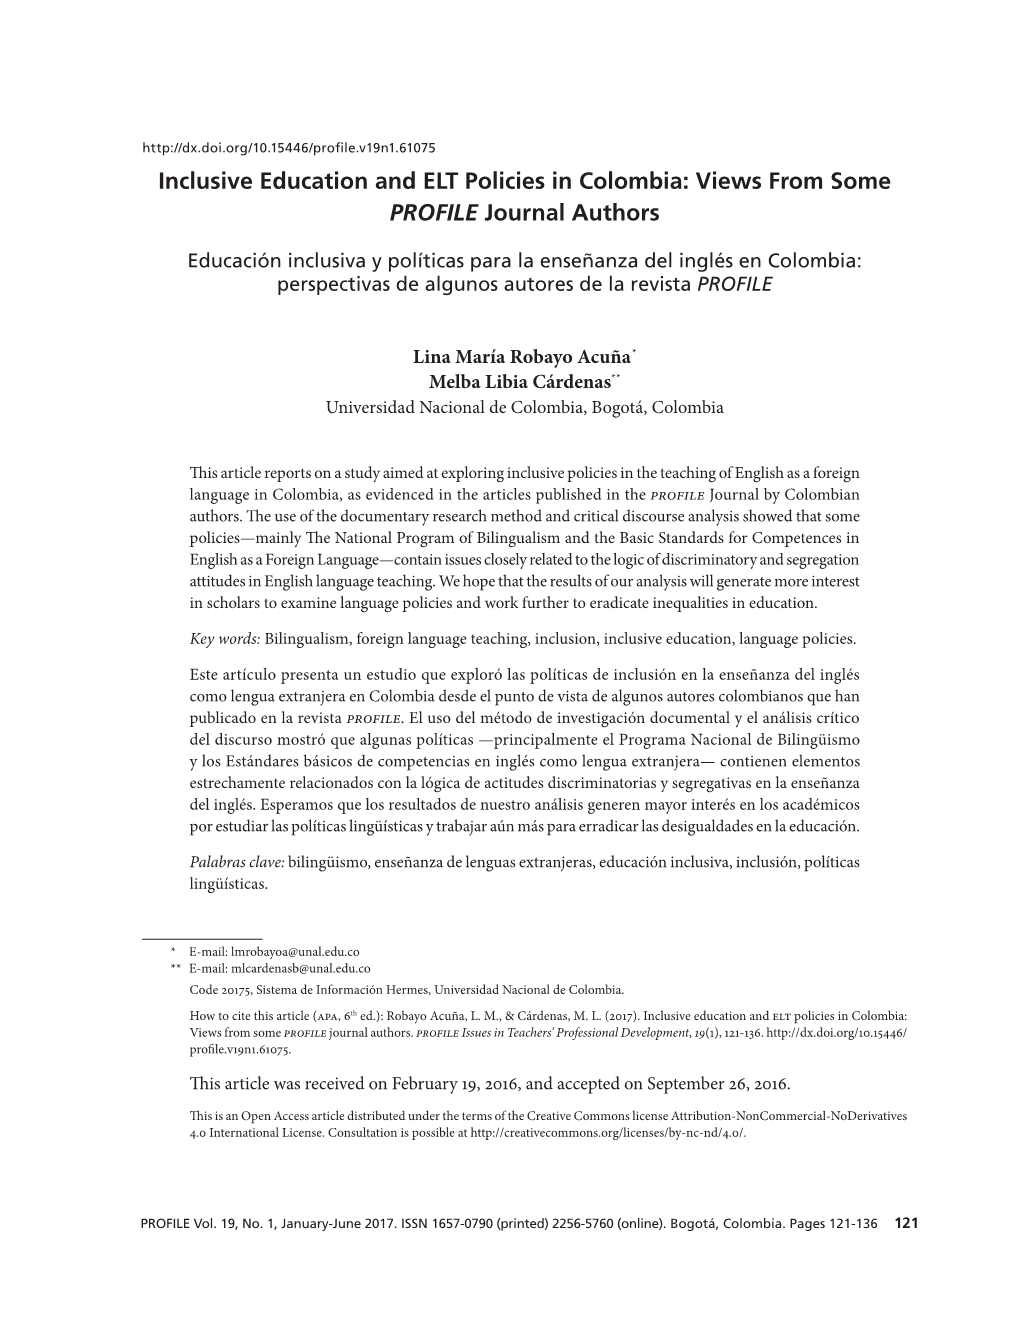 Inclusive Education and ELT Policies in Colombia: Views from Some PROFILE Journal Authors